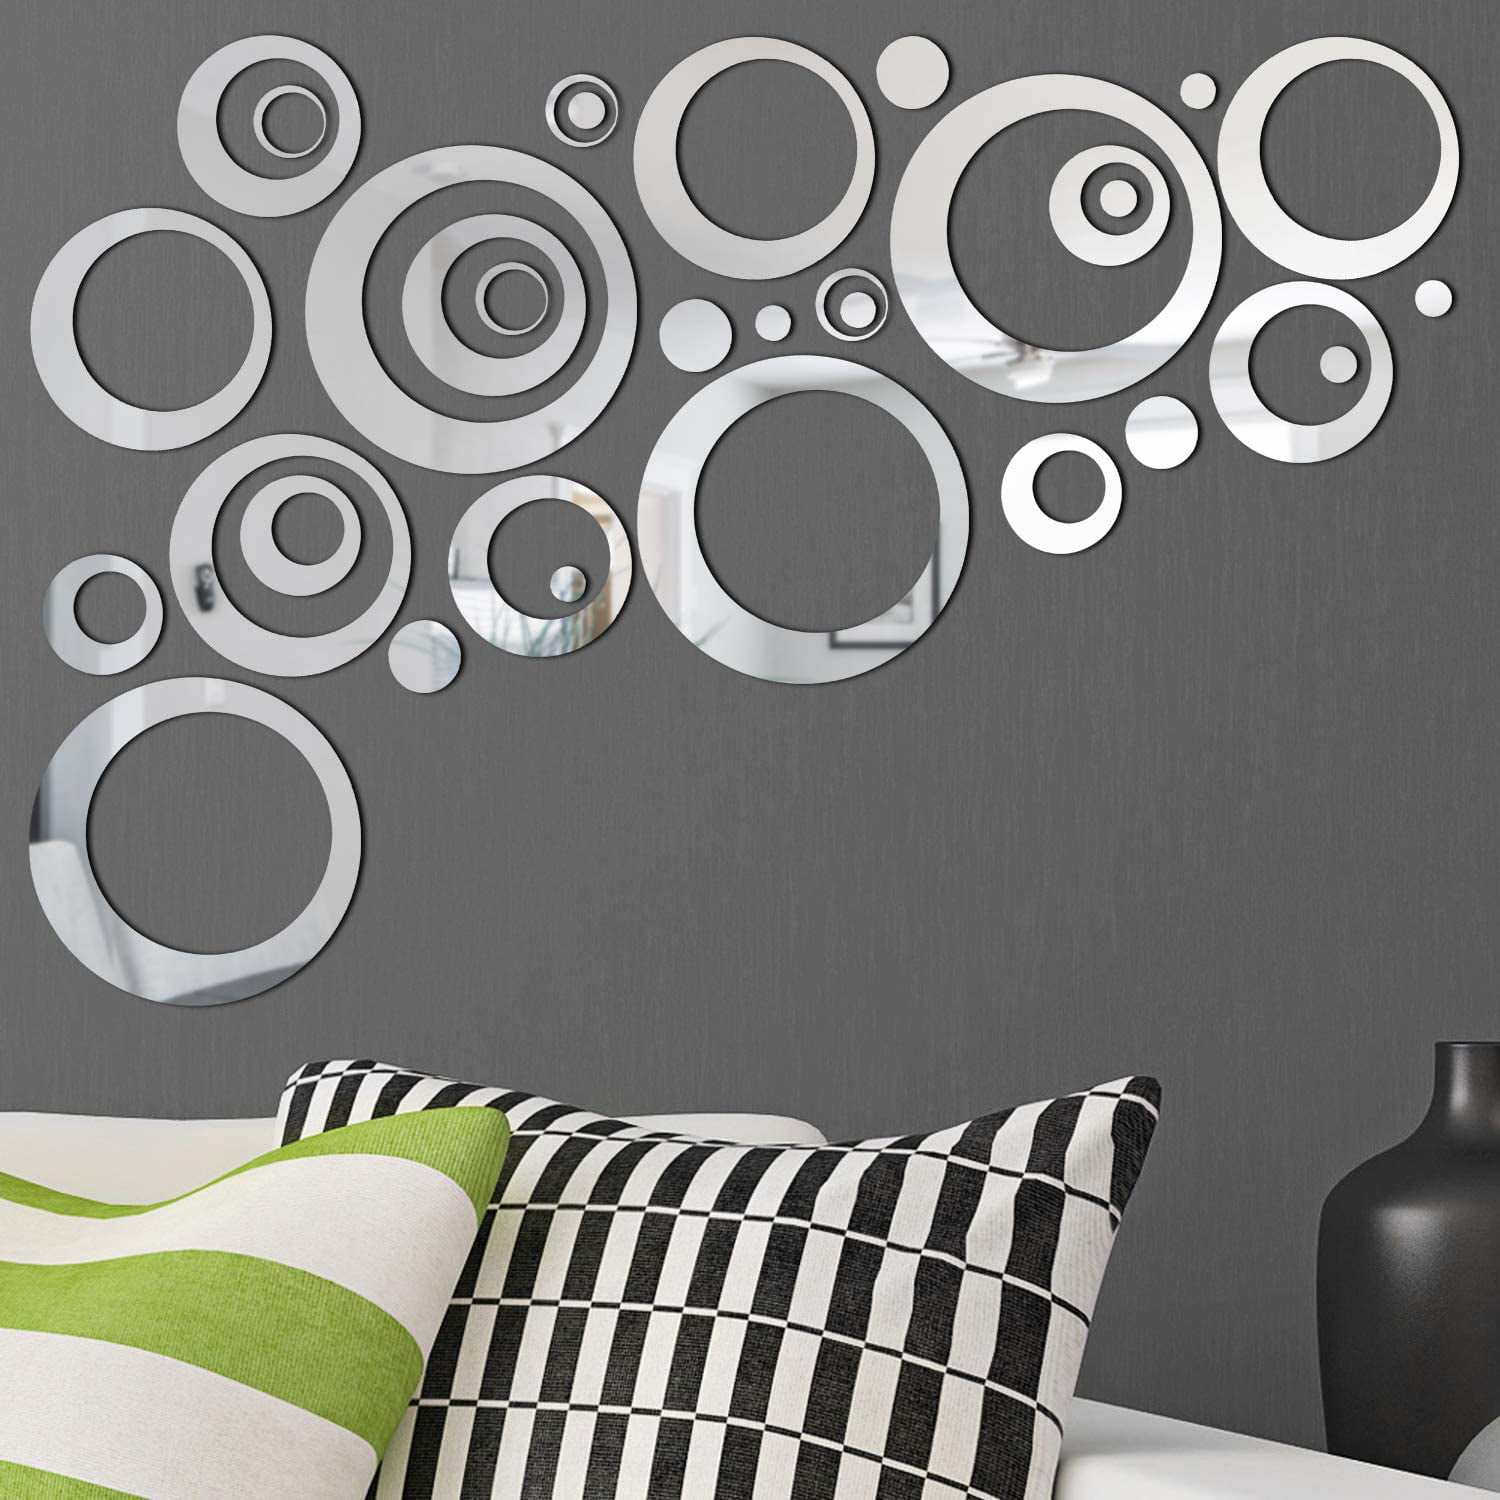 Mirrored Wall Sticker For Bedroom Living Room Wall Decor Decal Art 